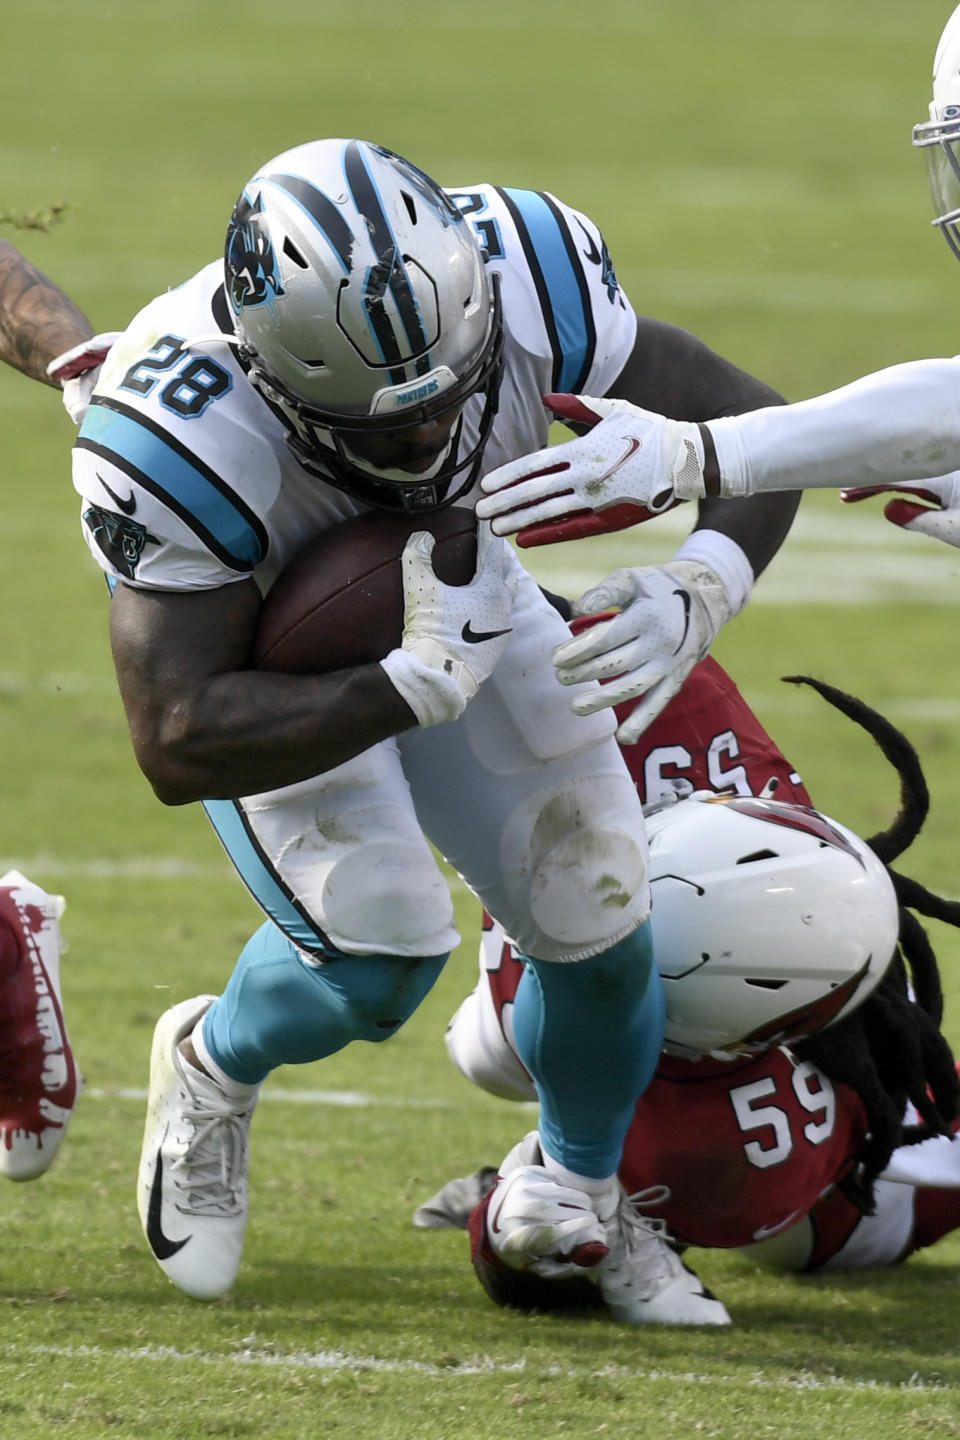 Carolina Panthers running back Mike Davis is tackled by Arizona Cardinals outside linebacker De'Vondre Campbell during the second half of an NFL football game Sunday, Oct. 4, 2020, in Charlotte, N.C. (AP Photo/Mike McCarn)